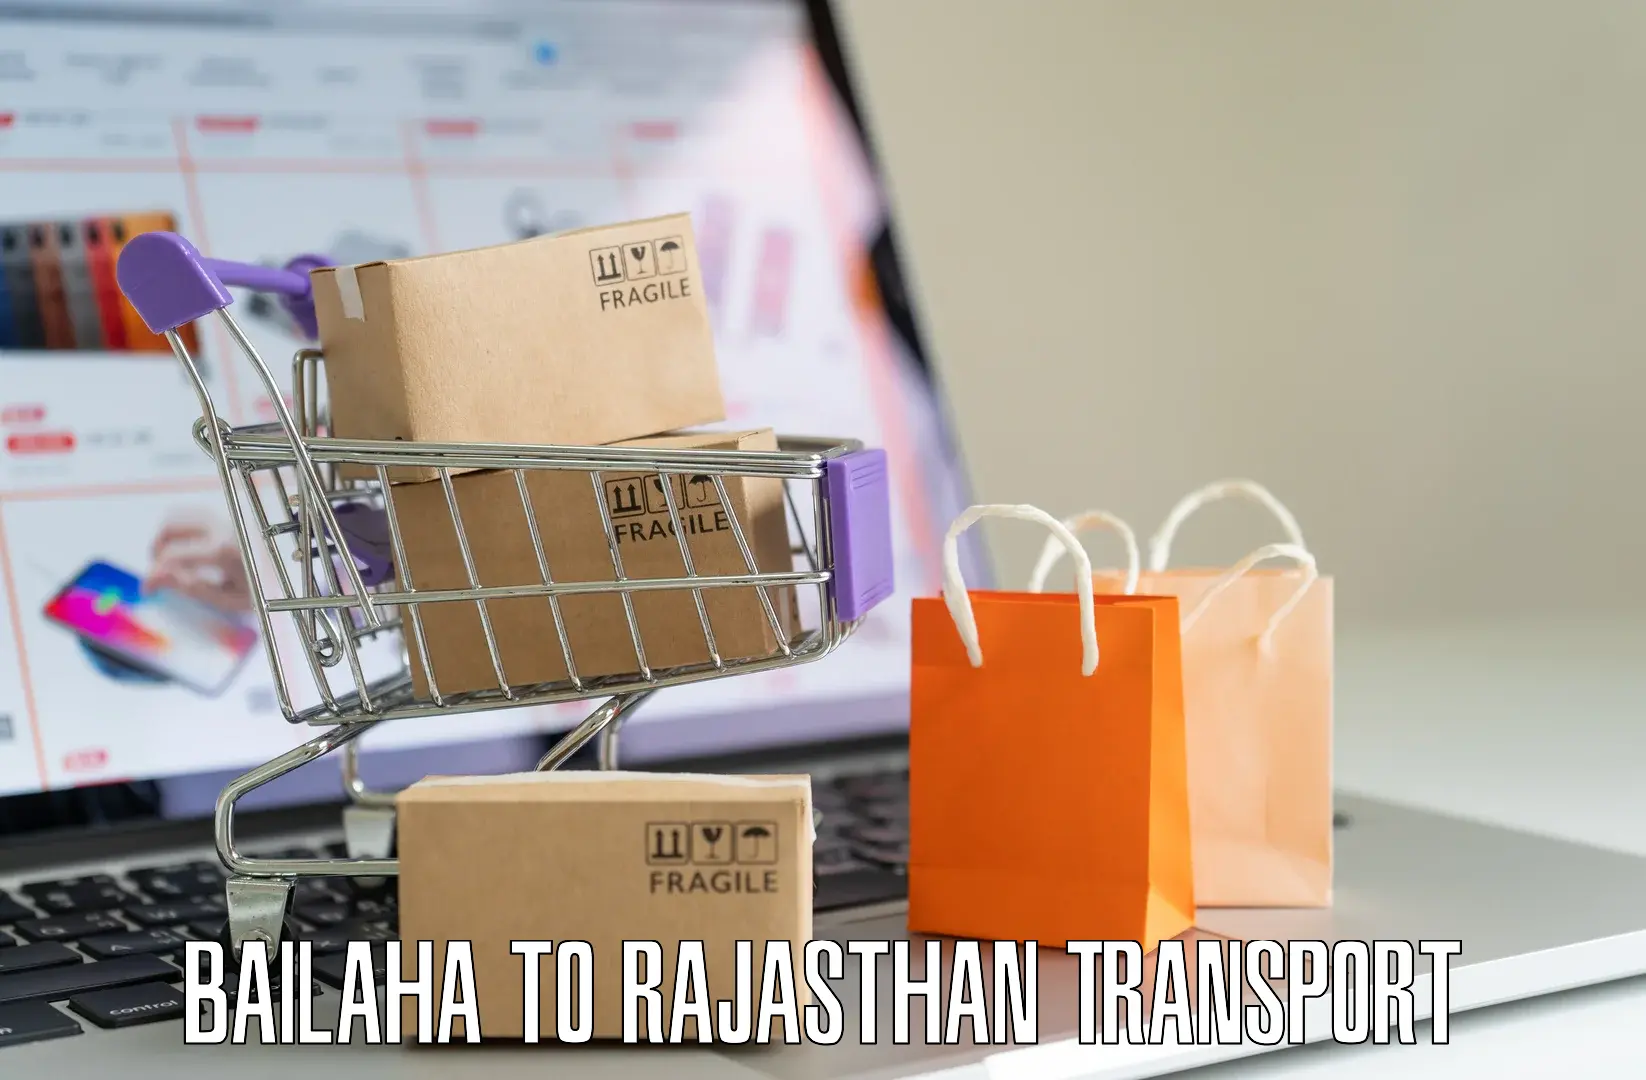 Container transport service Bailaha to Pali